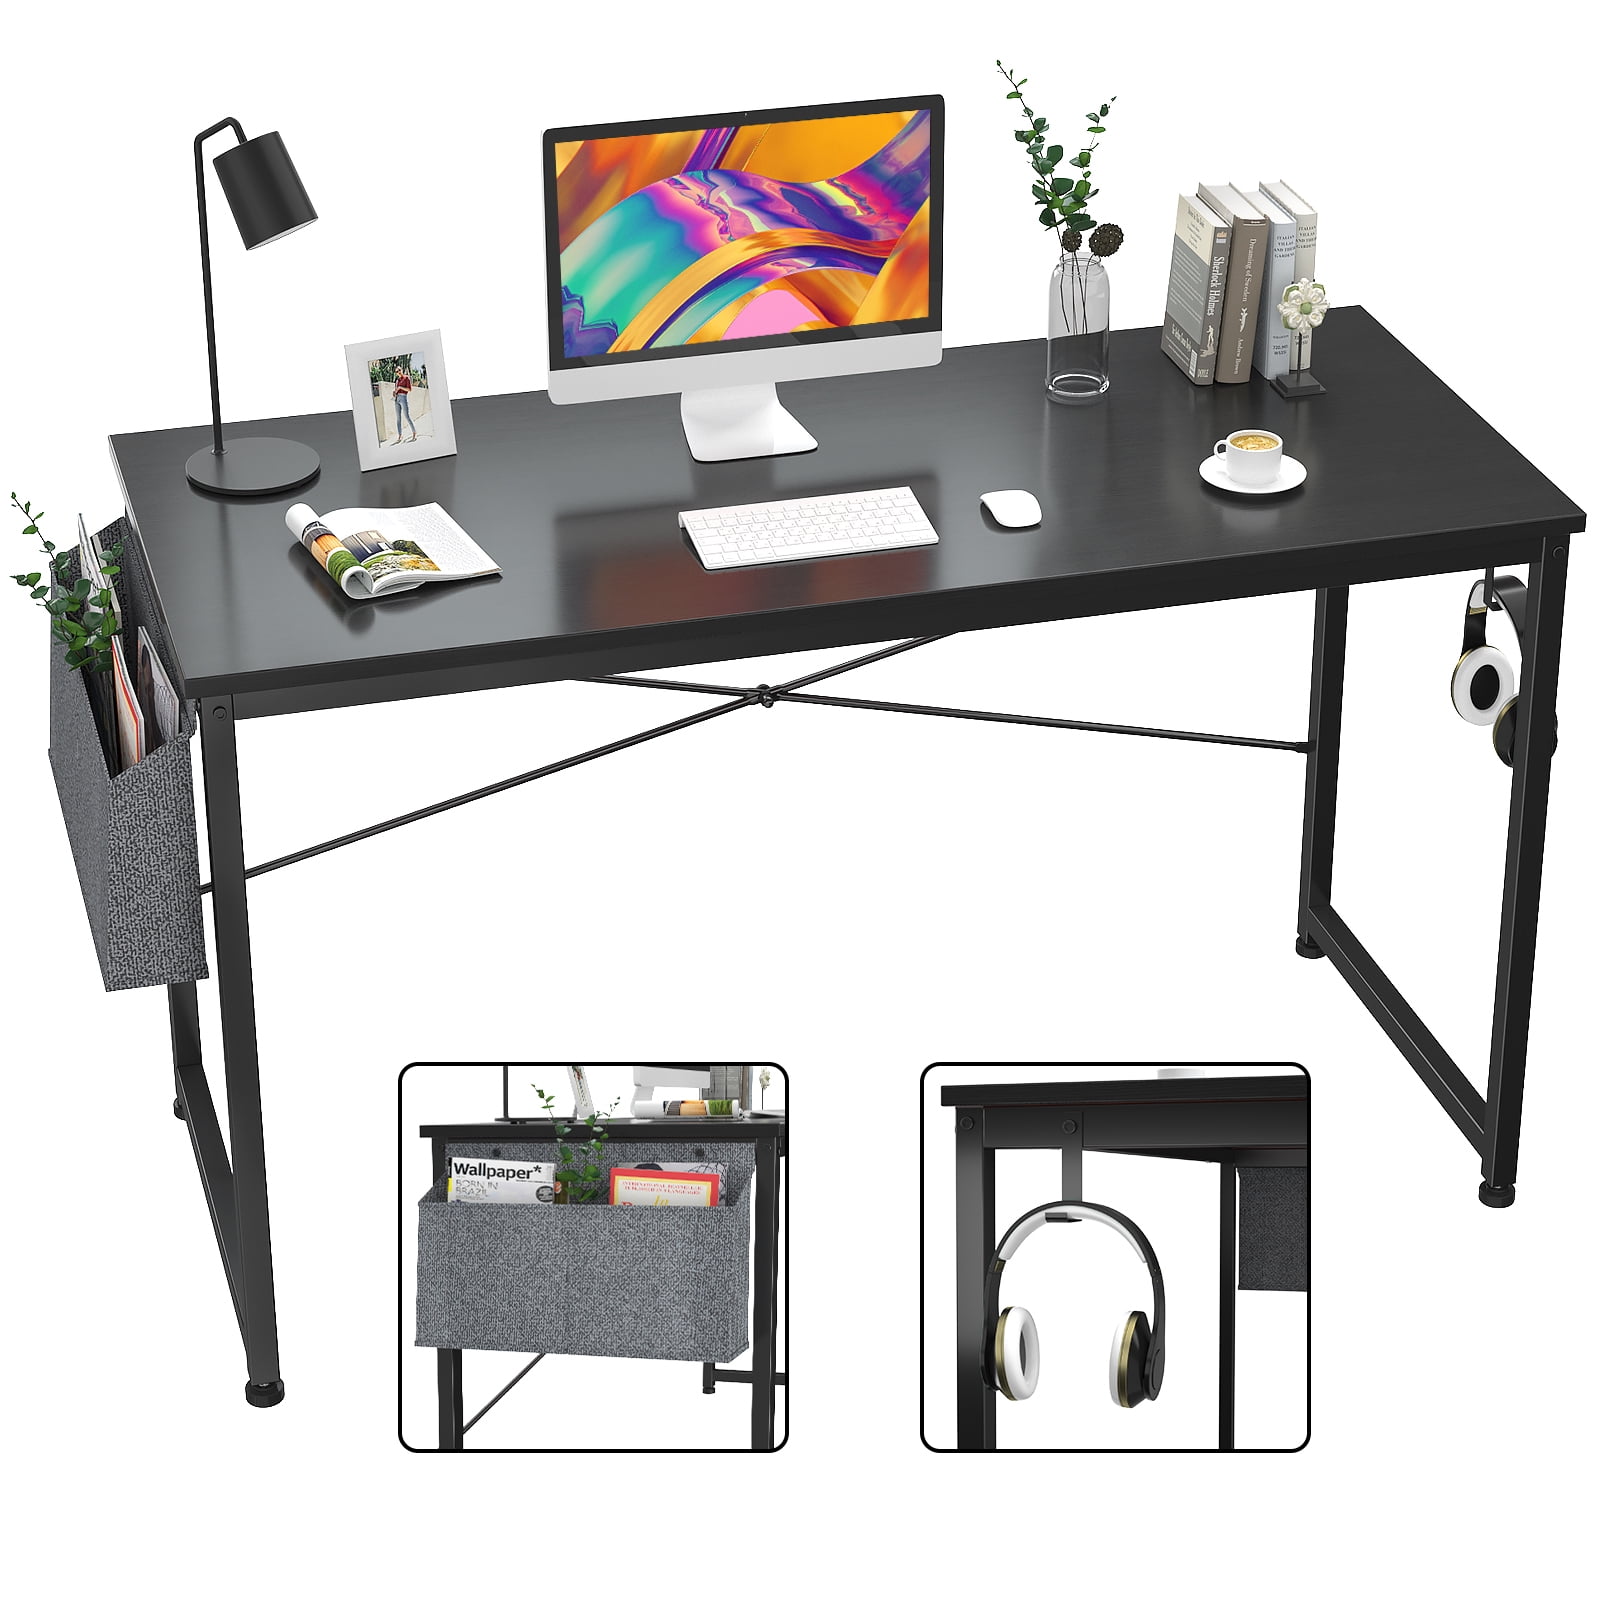 Details about   47'' Modern Computer Desk Gaming PC Laptop Table Study Workstation Home Office 